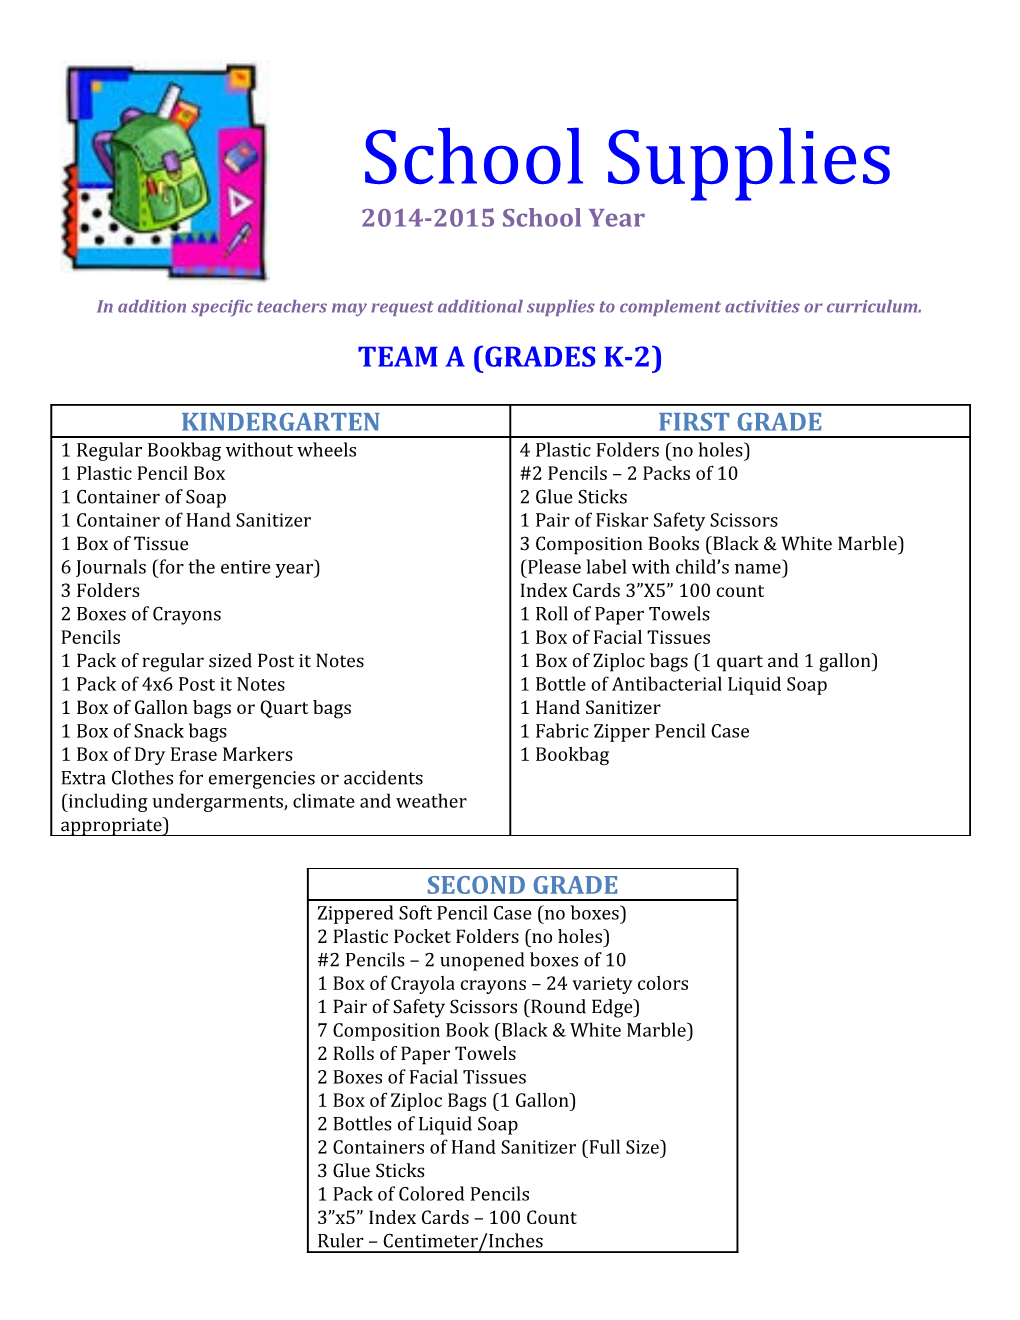 In Addition Specific Teachers May Request Additional Supplies to Complement Activities